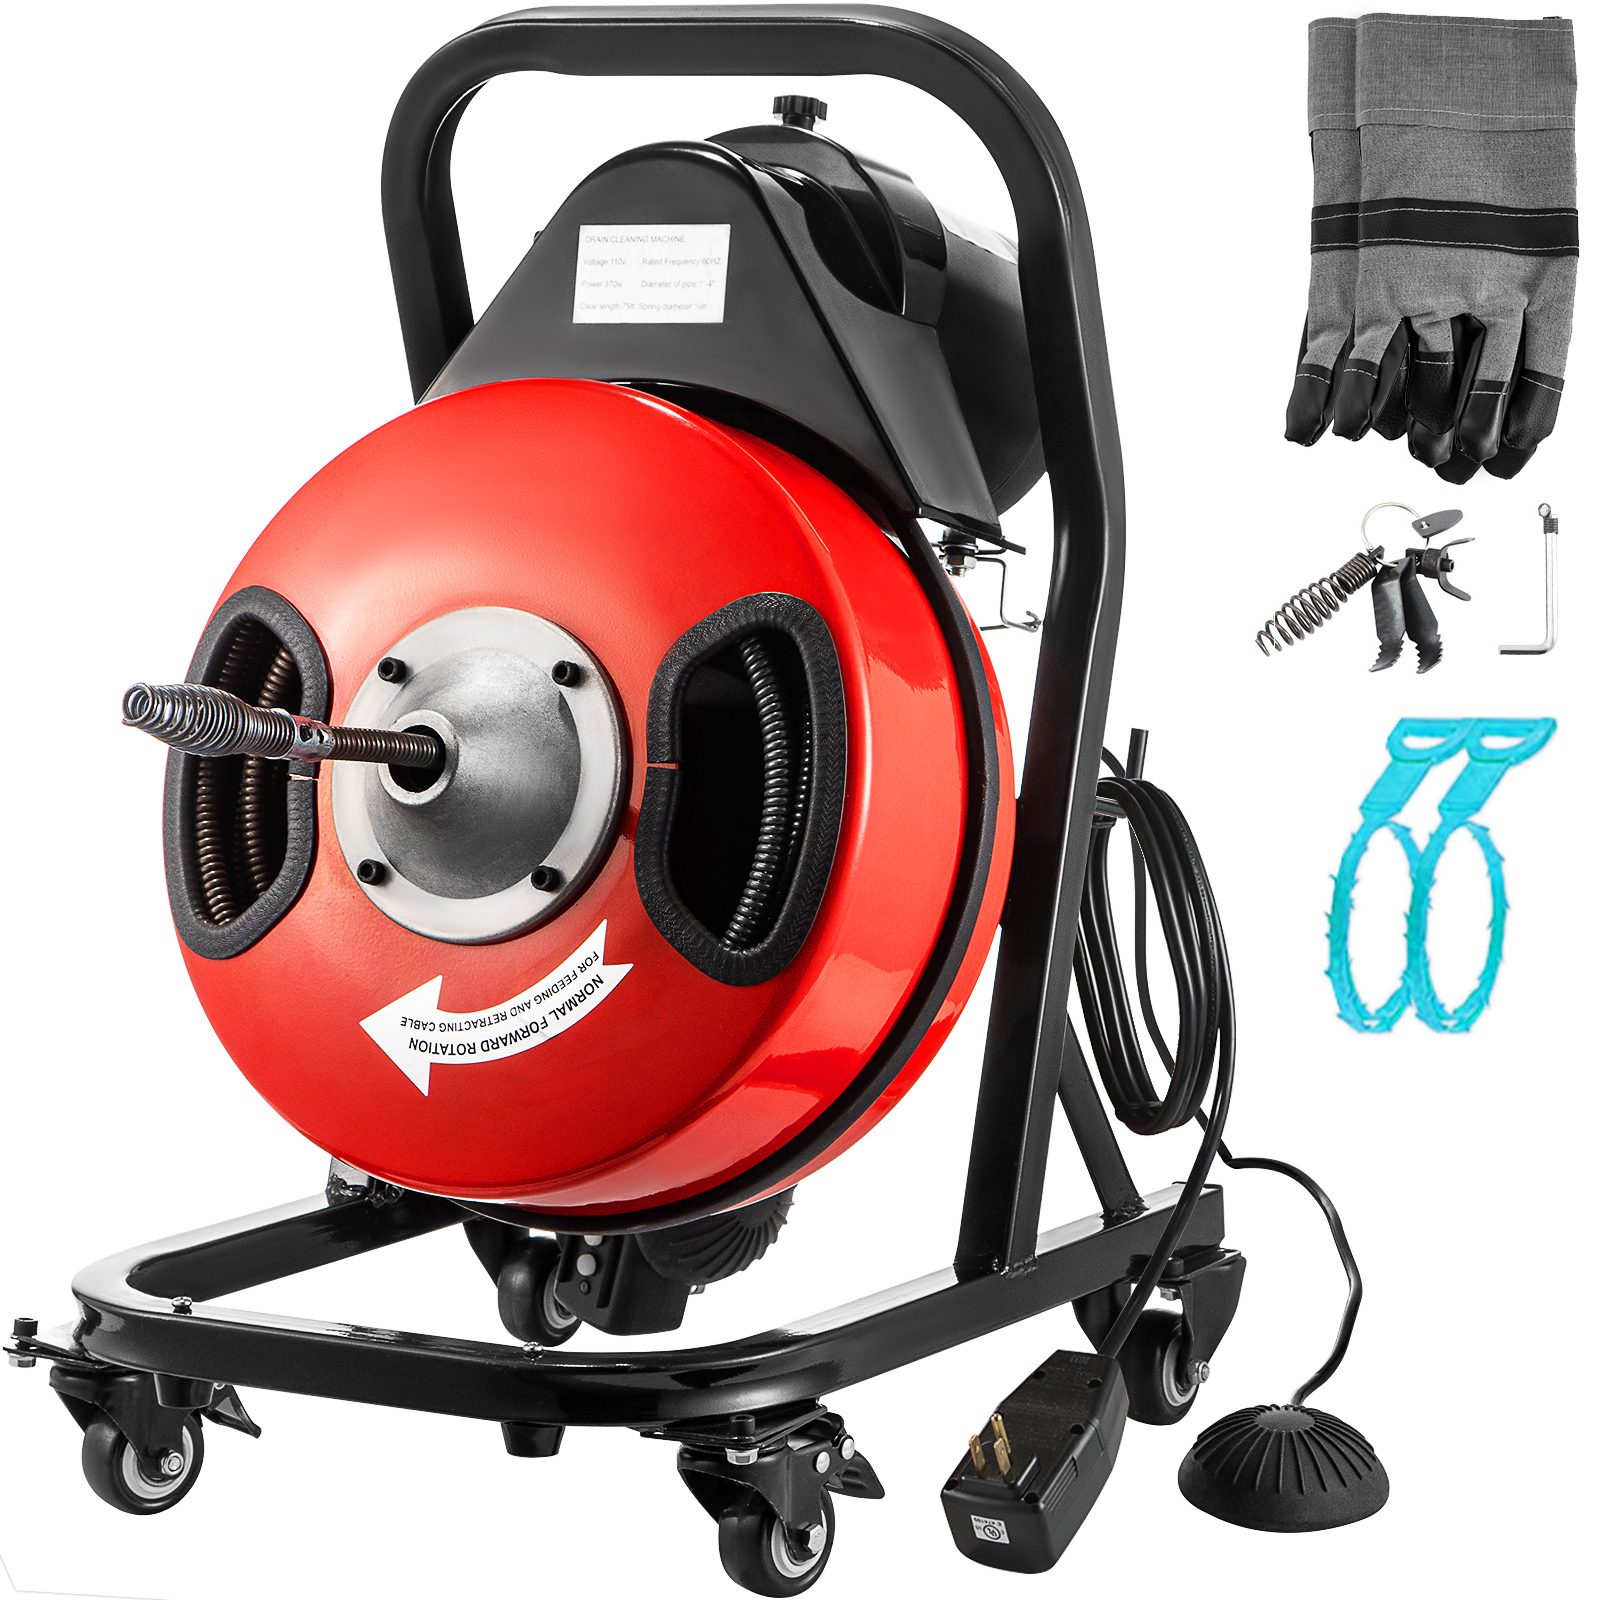 VEVOR 50 ft x 1/2 inch Drain Cleaner Machine Best Fit 1”(25mm) to 4”(100mm) Pipes Drain Cleaning Machine Portable Drain Auger Cleaner with 4 Cutters